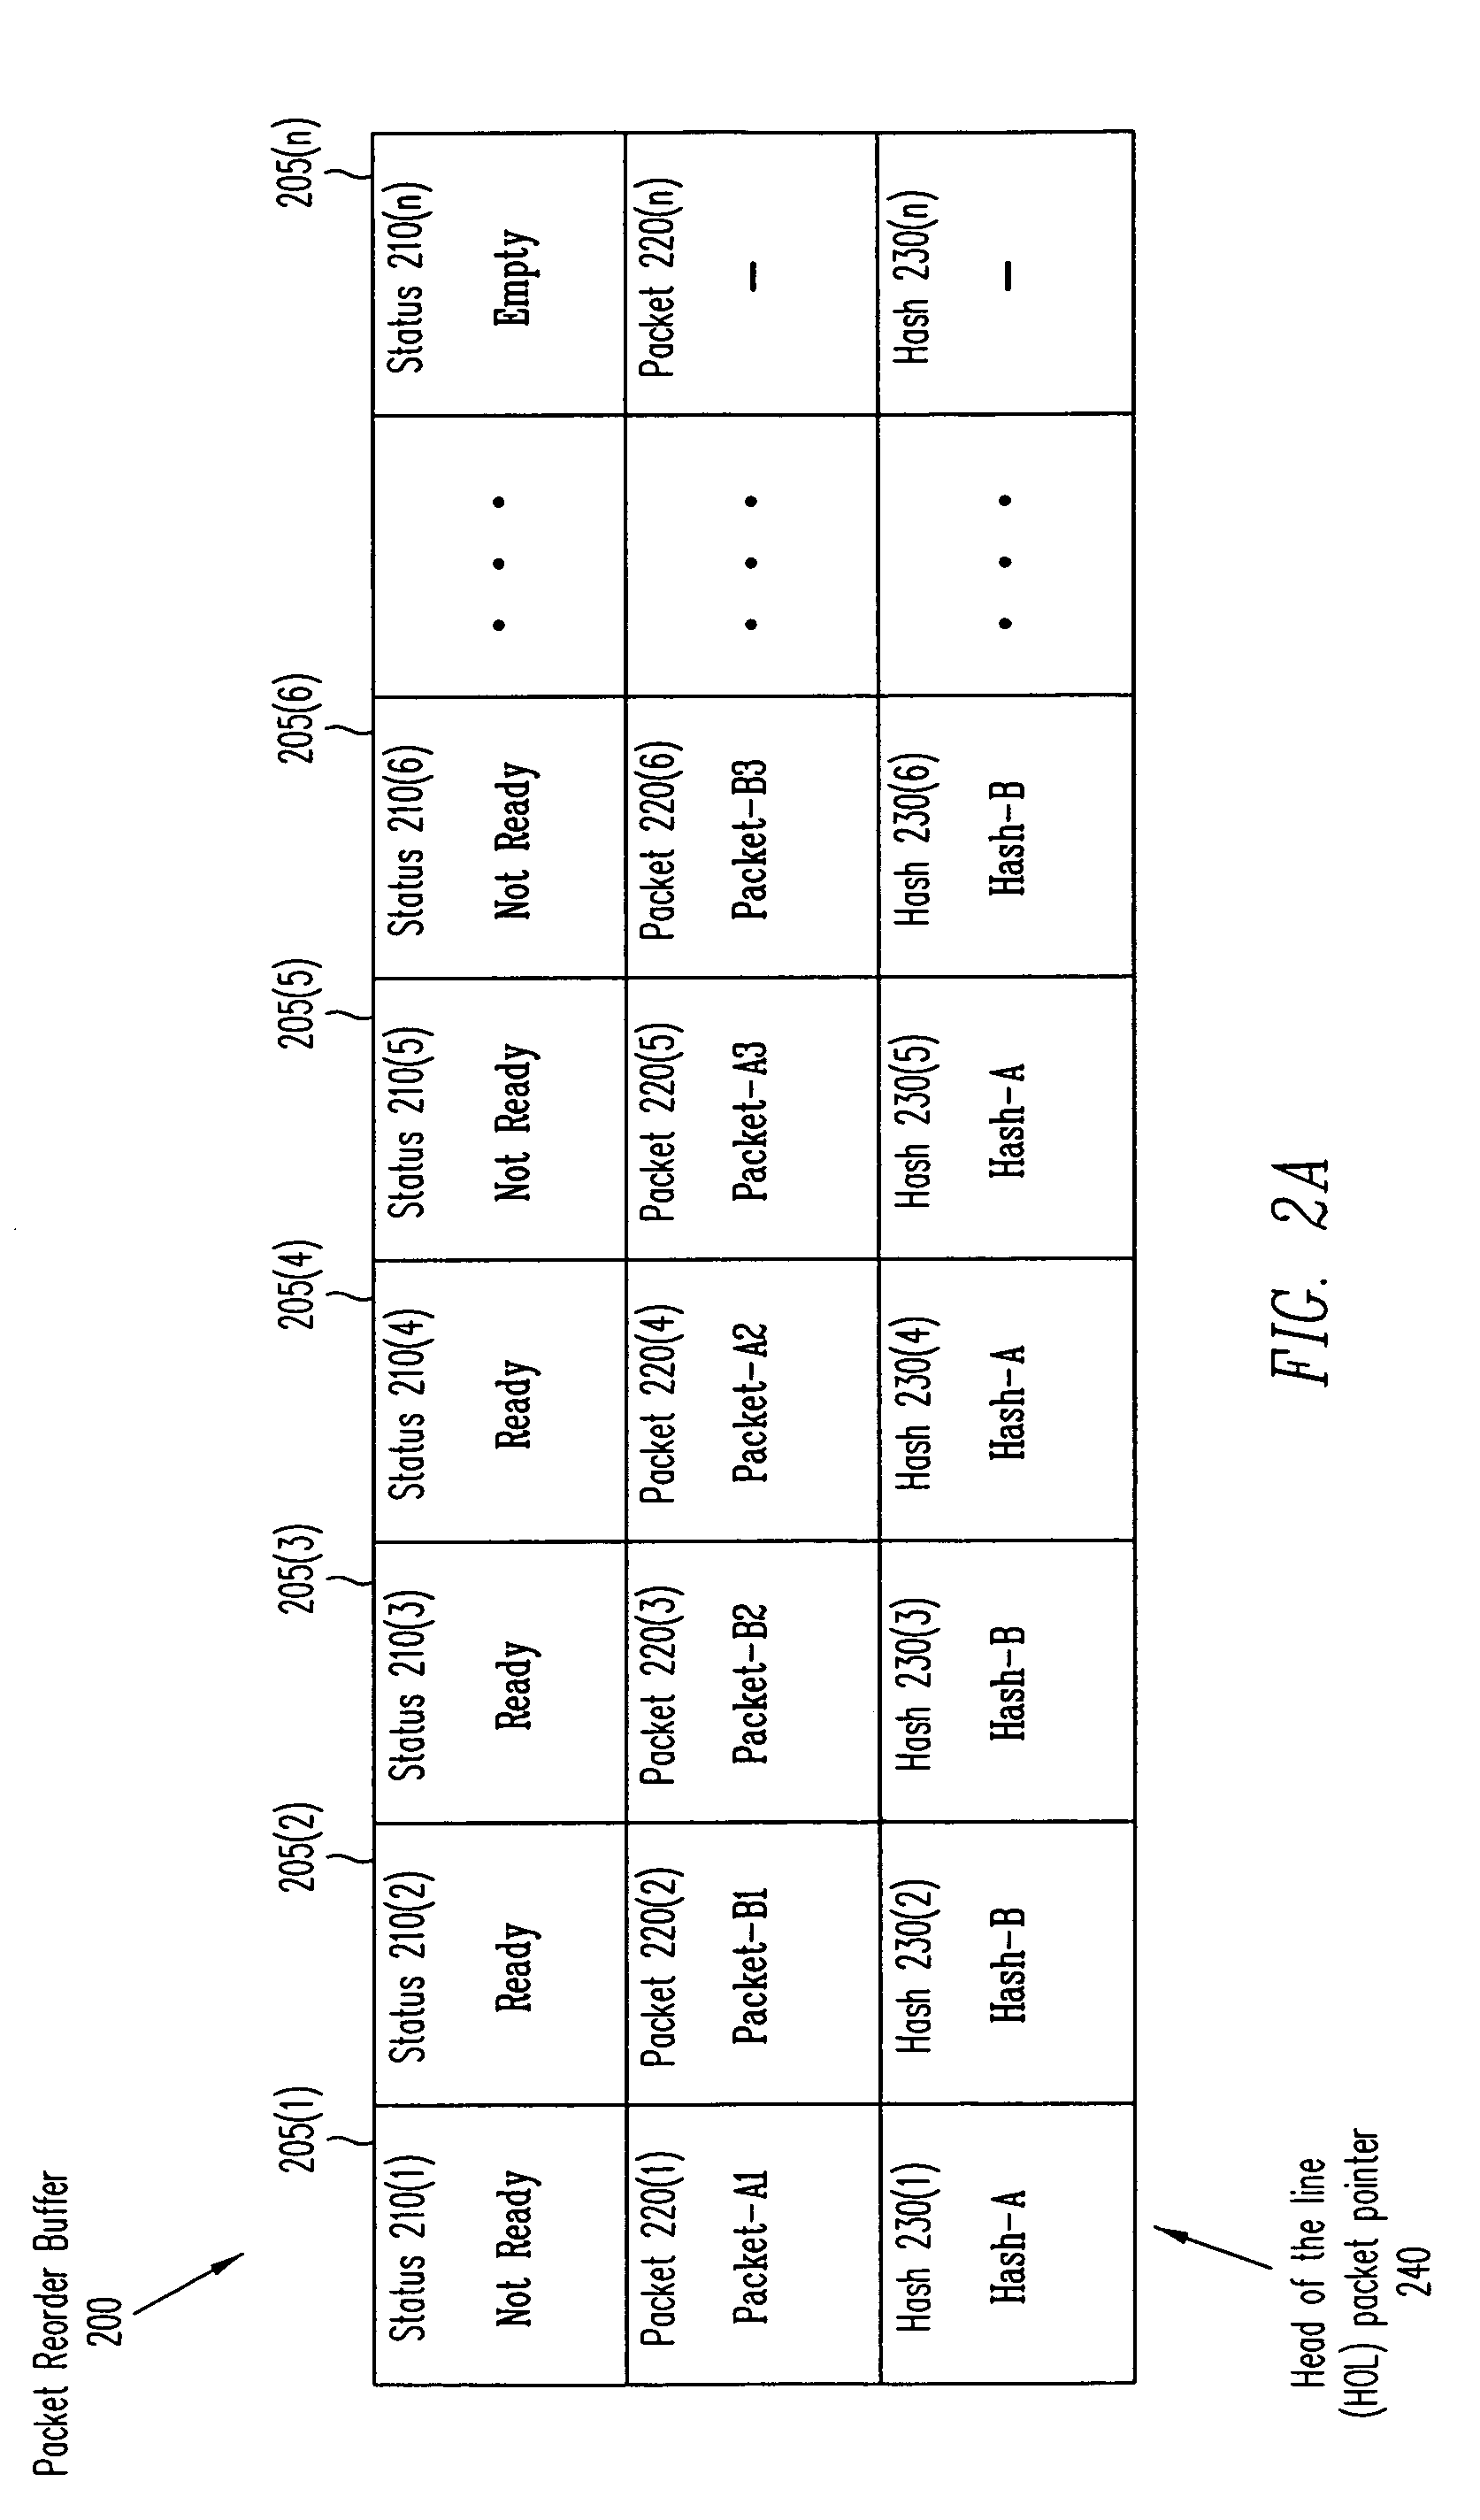 Packet forwarding throughput with partial packet ordering